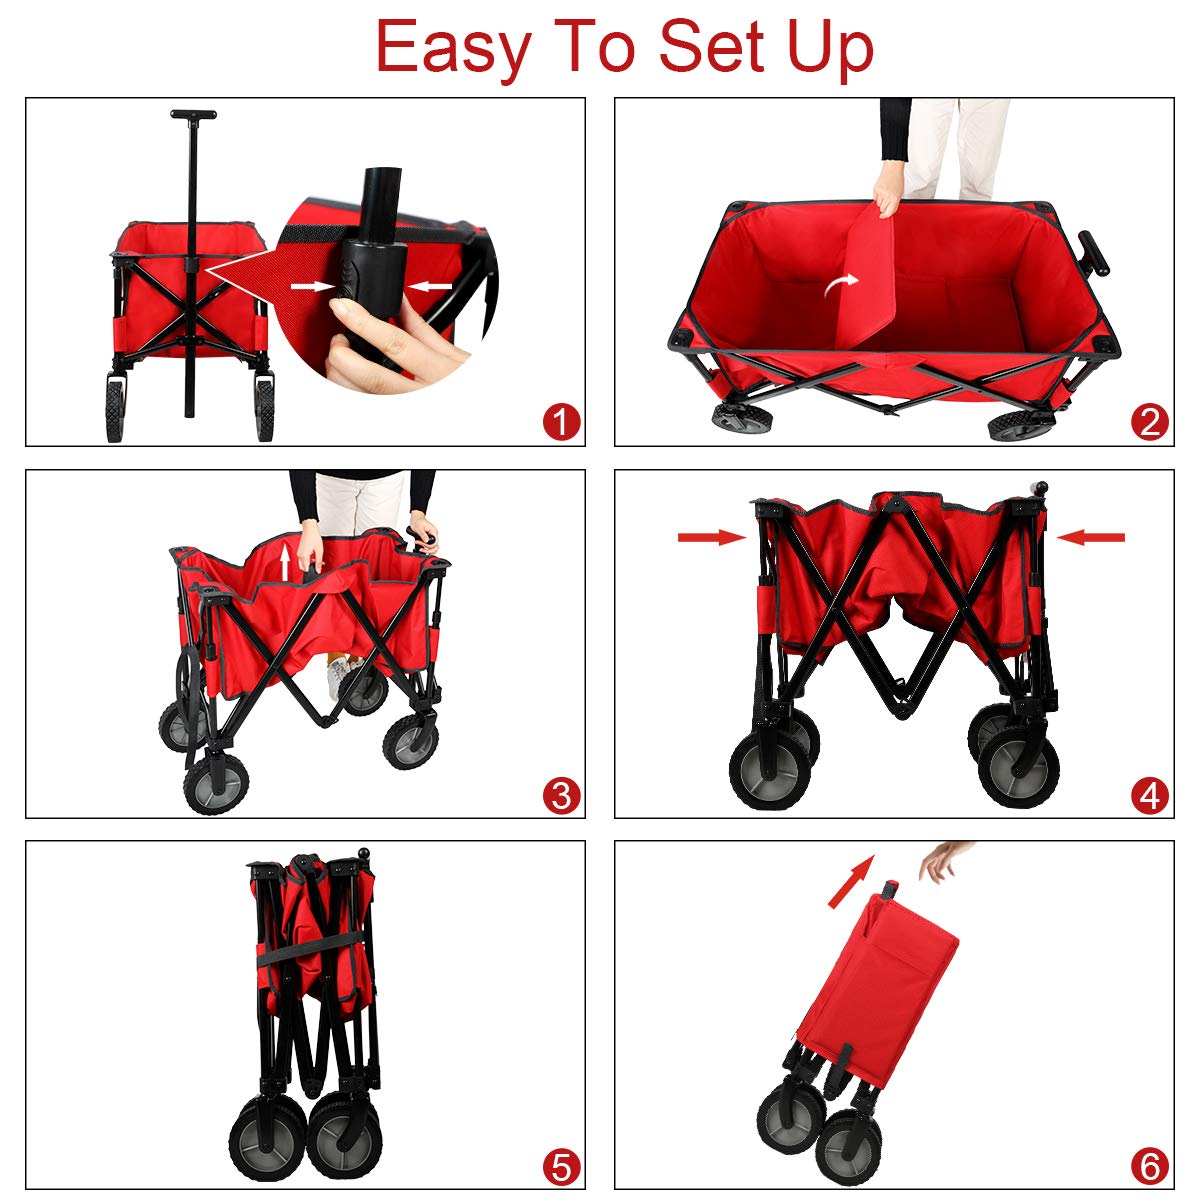 Portal Quad Folding Utility Wagon Camping Garden Cart with Telescoping Handle, Red